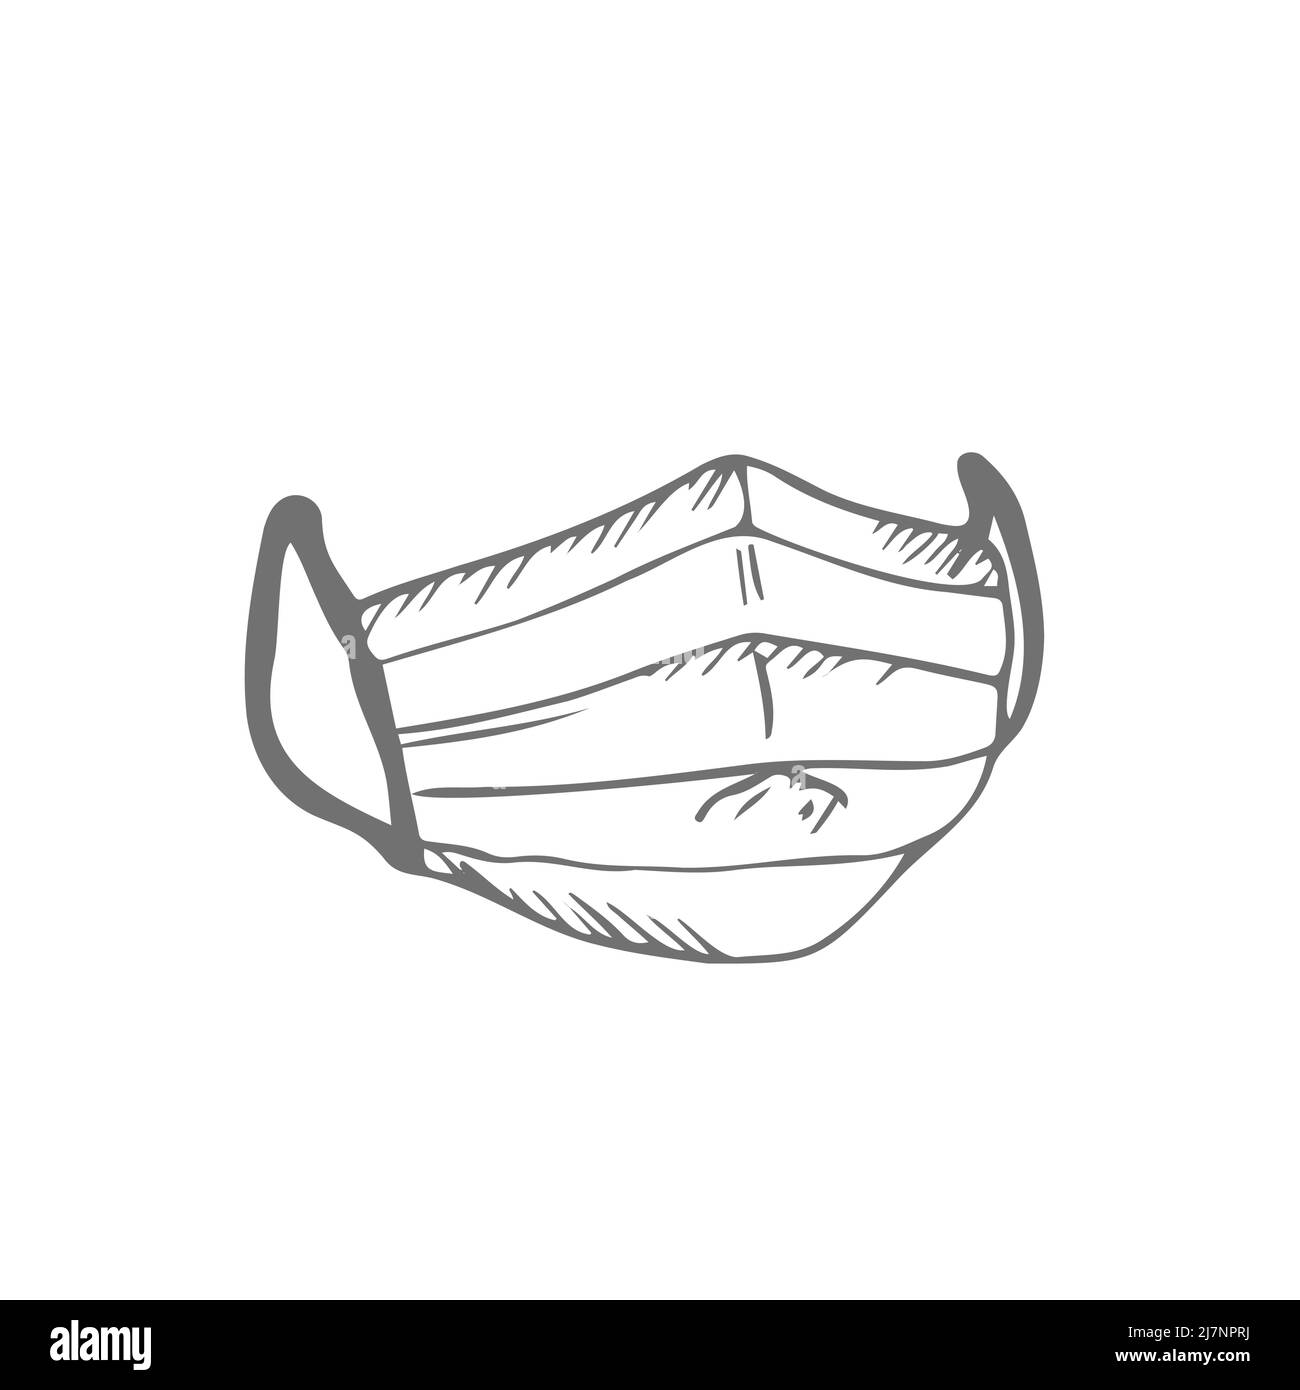 Surgical mask, hand drawn vector doodle illustration of a face mask used by people against COVID-19. Stock Vector